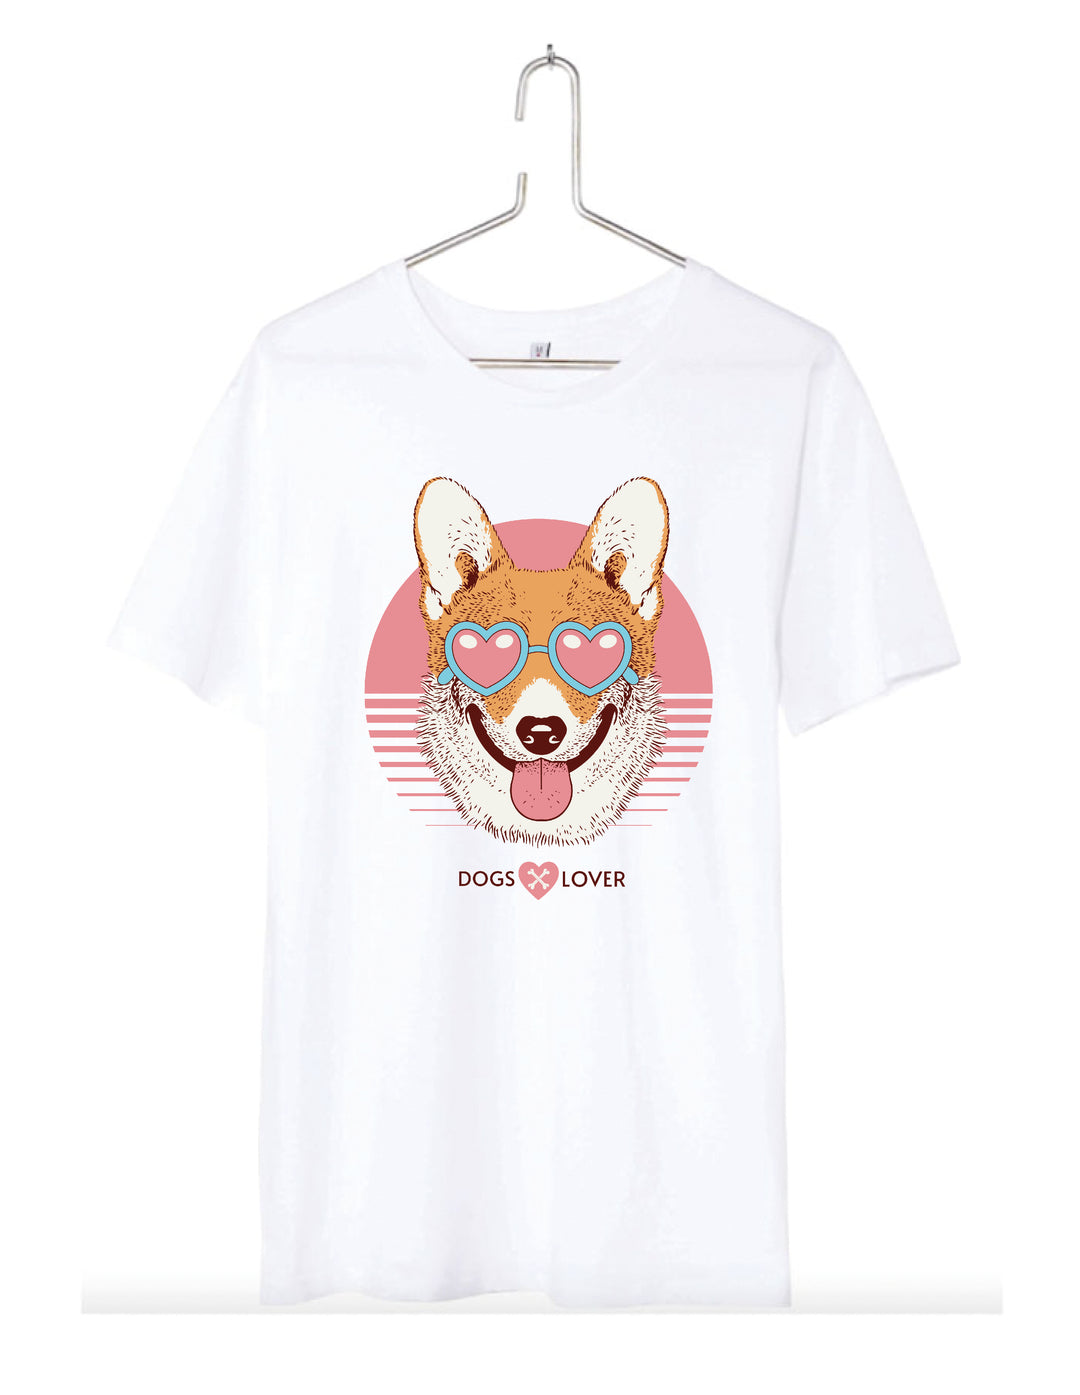 T-shirt homme Dogs lover